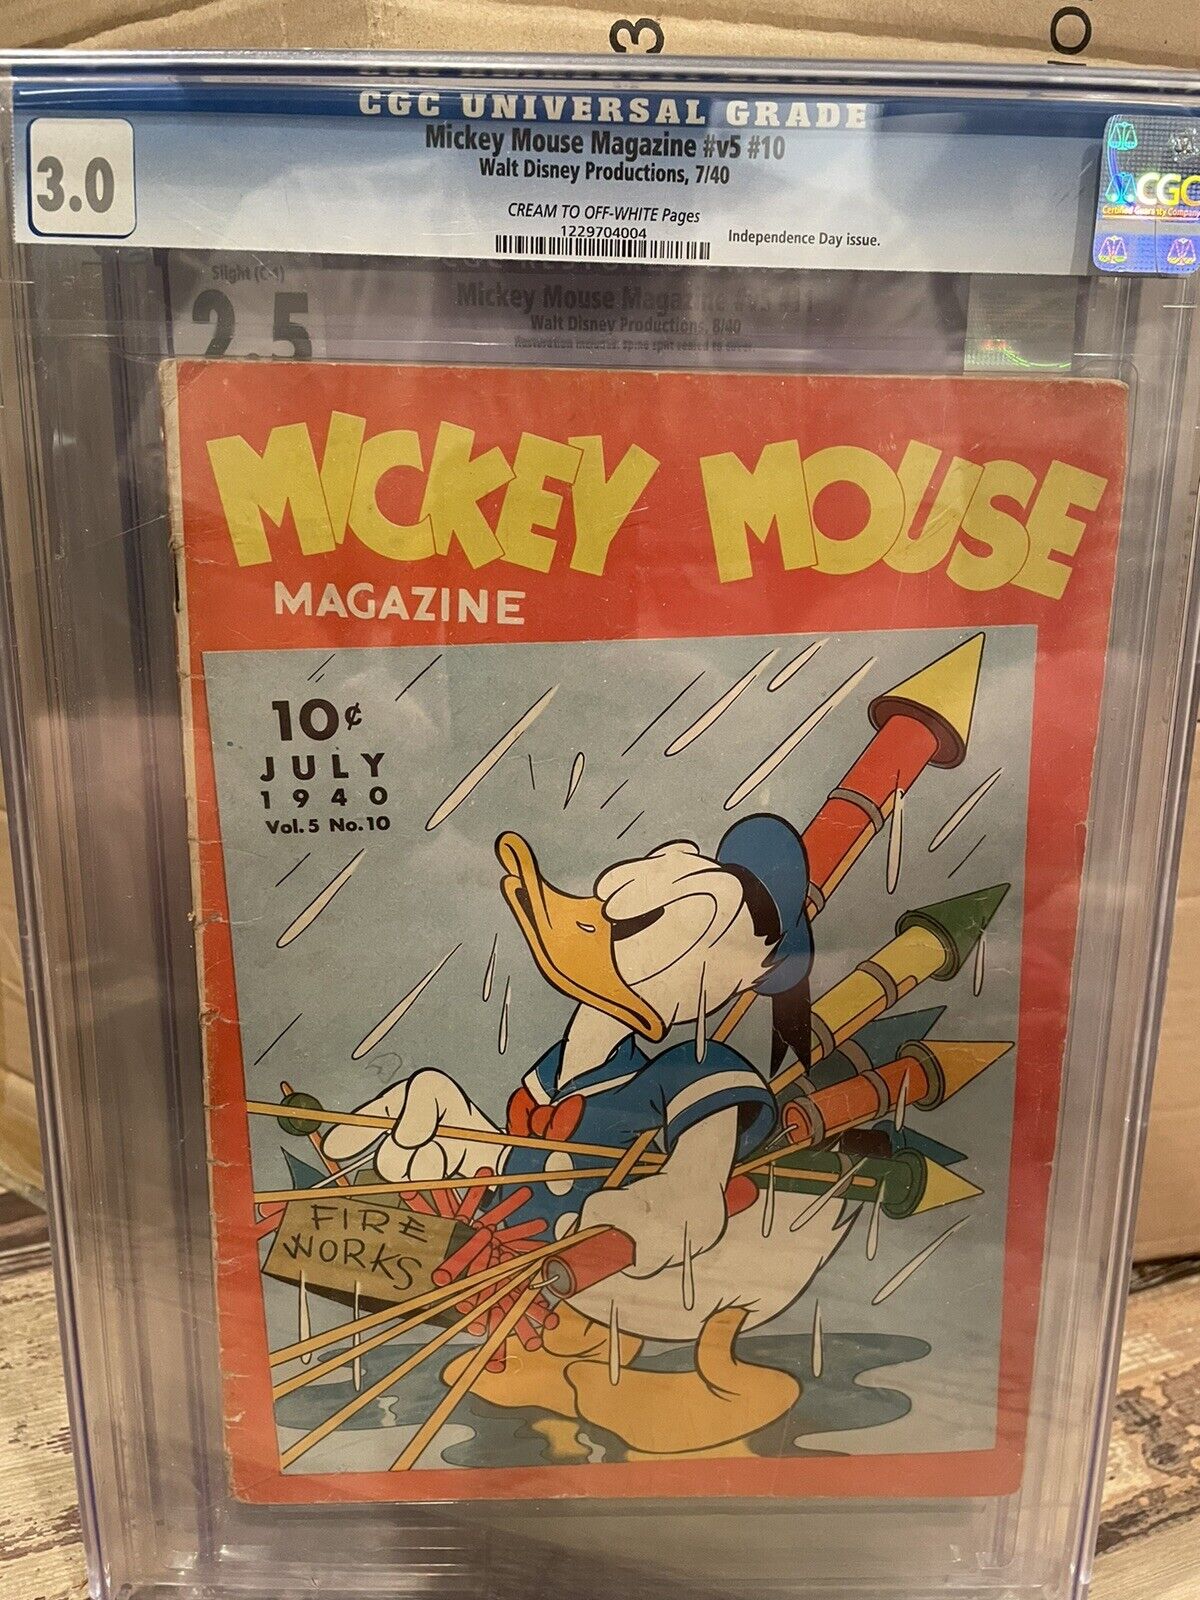 Mickey Mouse Magazine Vol 5 No 10 Cgc 3.0 Comic Graded Independence Day Cover